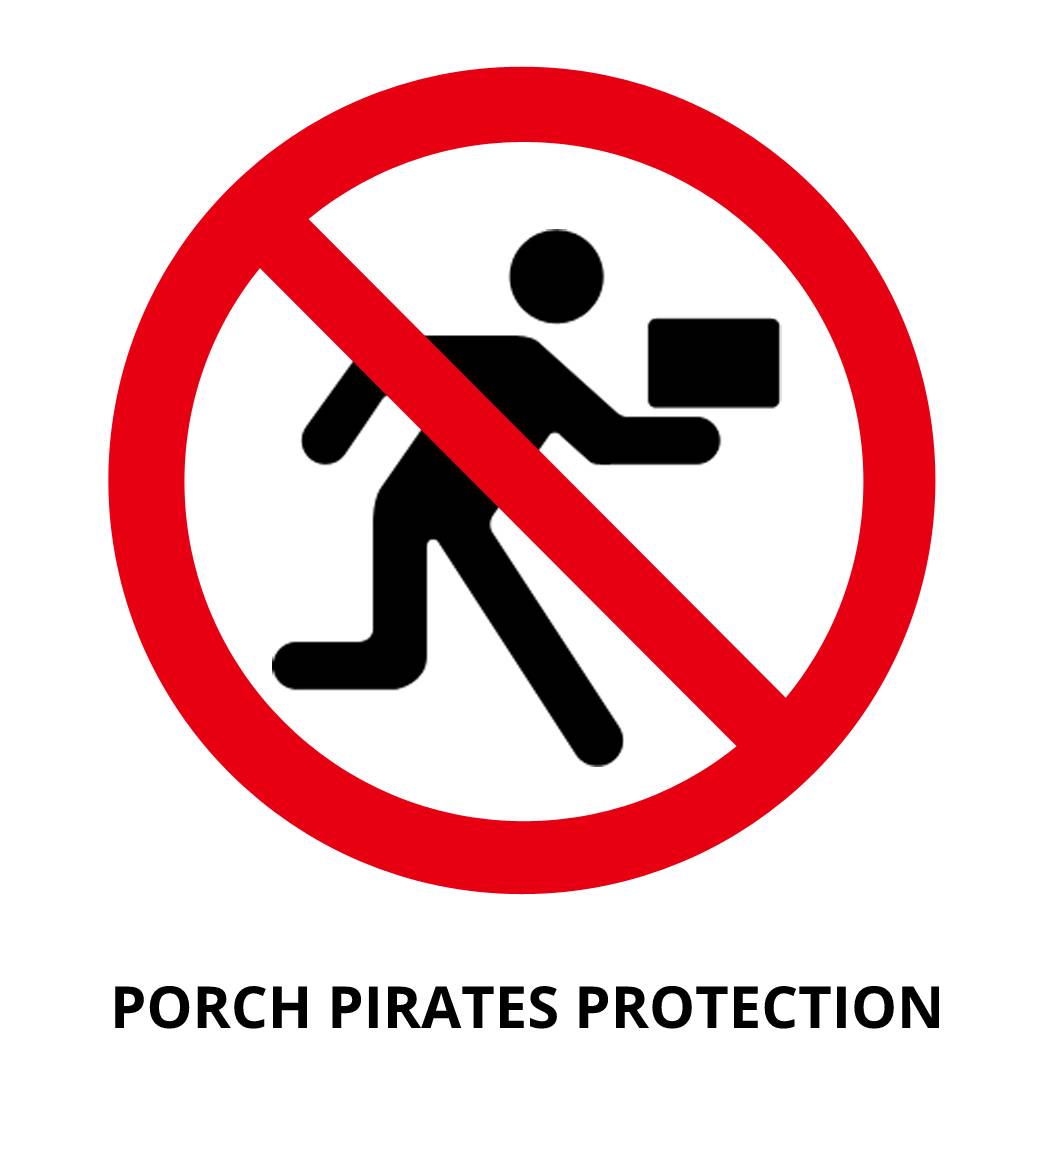 Porch Pirates Protection (affw)